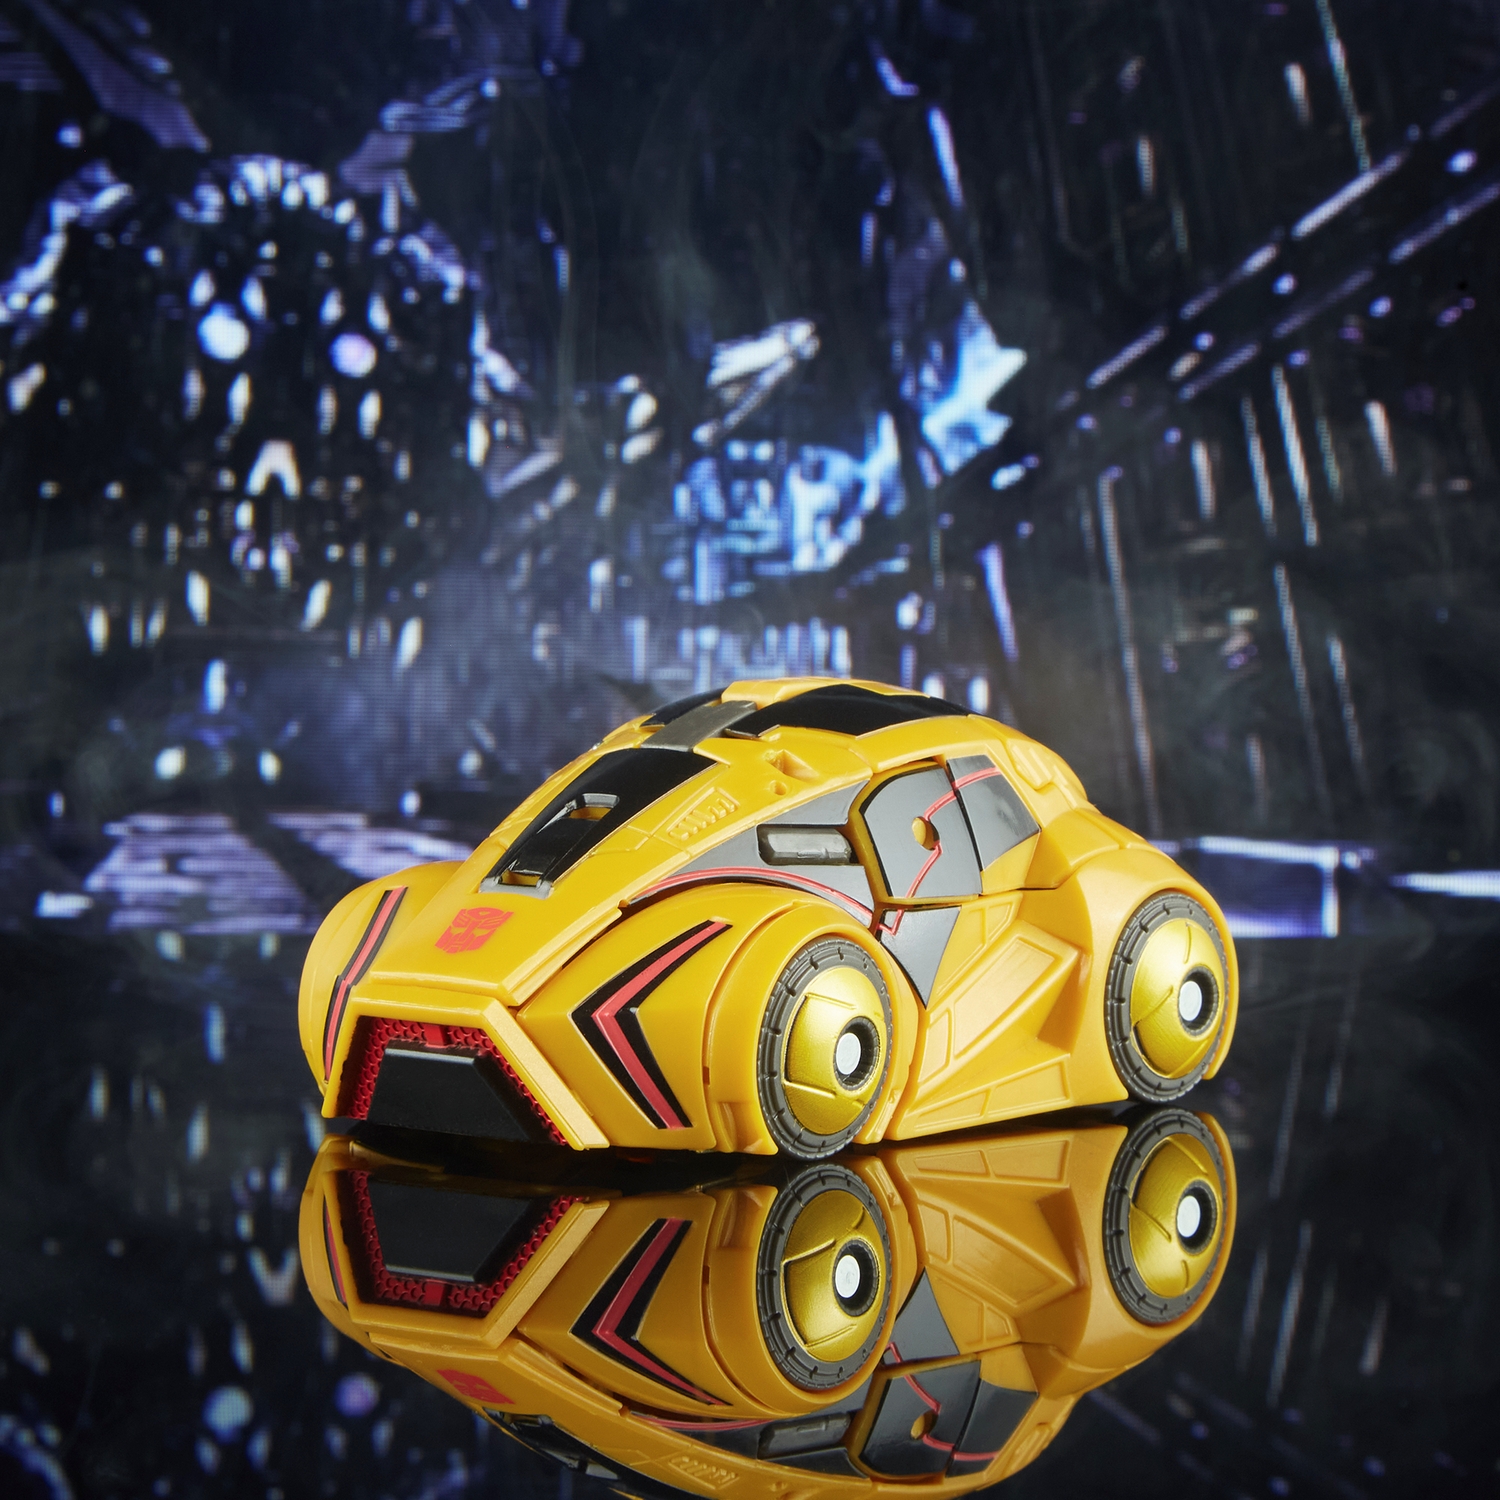 F7235_DIO_TRA_SS_GAMEREDITION_BUMBLEBEE_0003_2000 - Copy.jpg